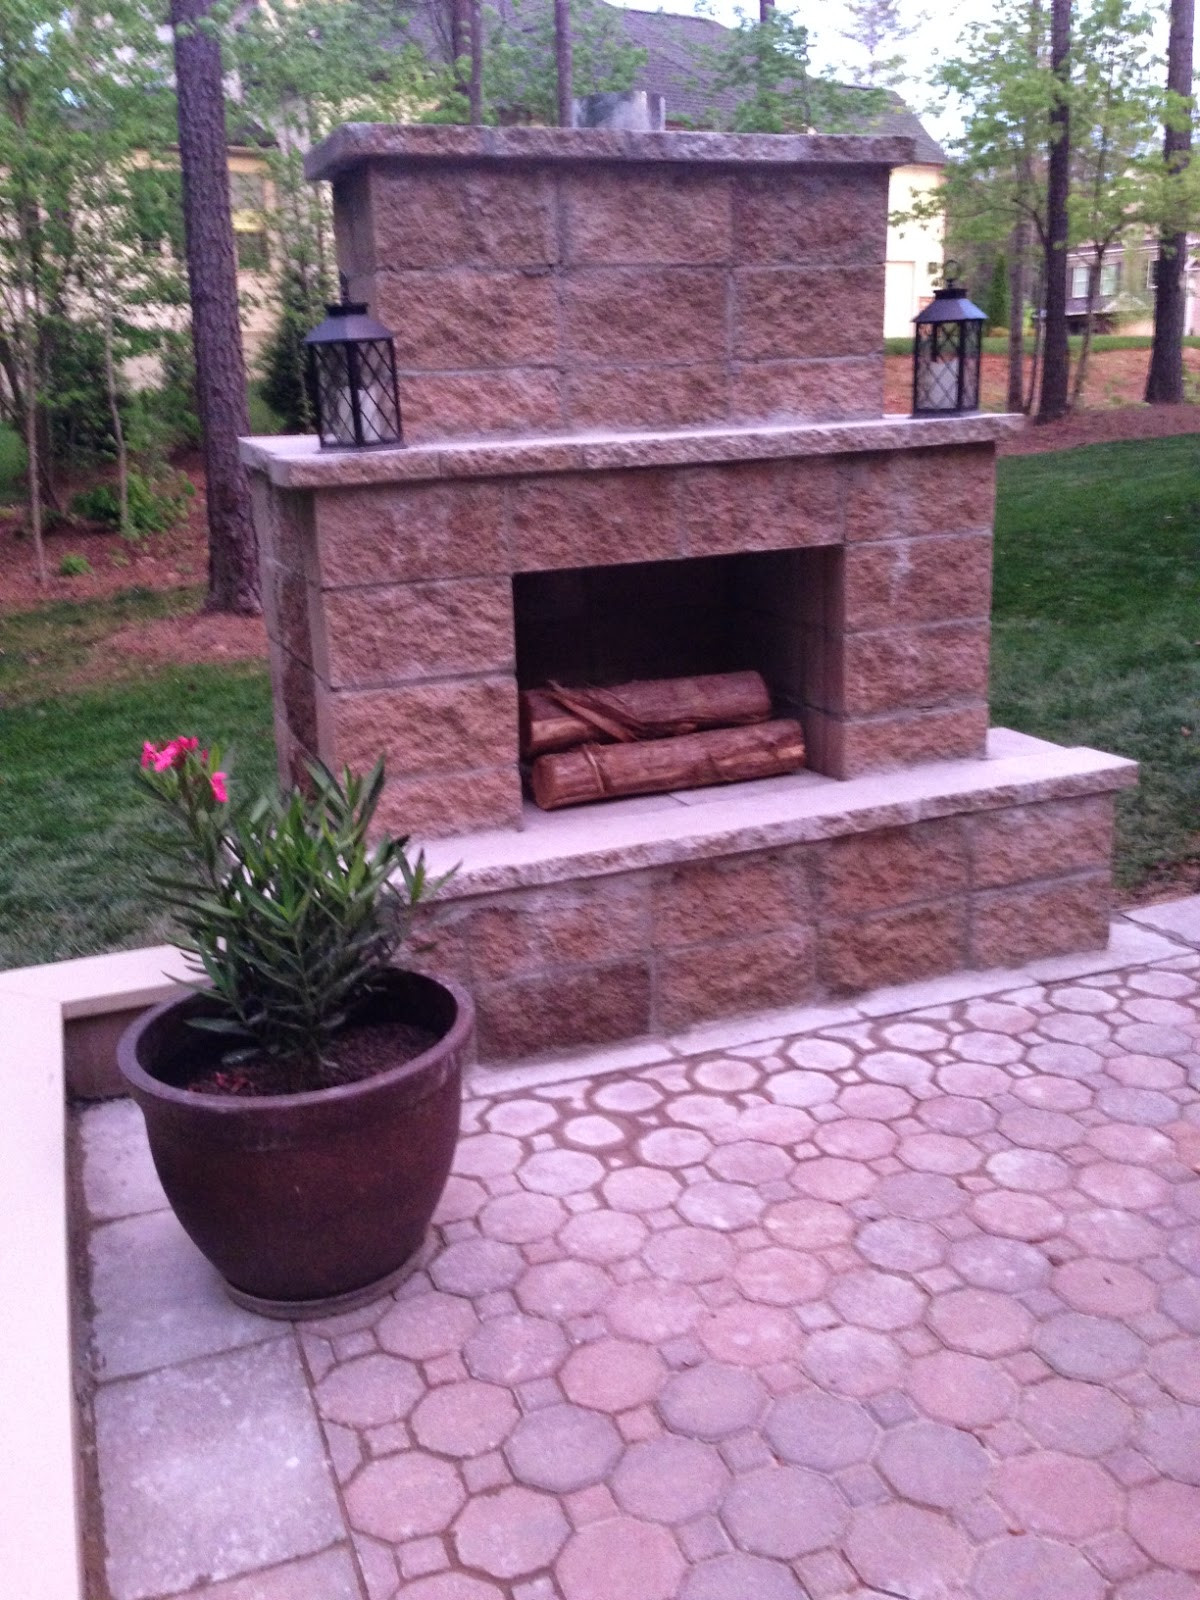 DIY Outdoor Fireplace Ideas
 Life in the Barbie Dream House DIY Paver Patio and